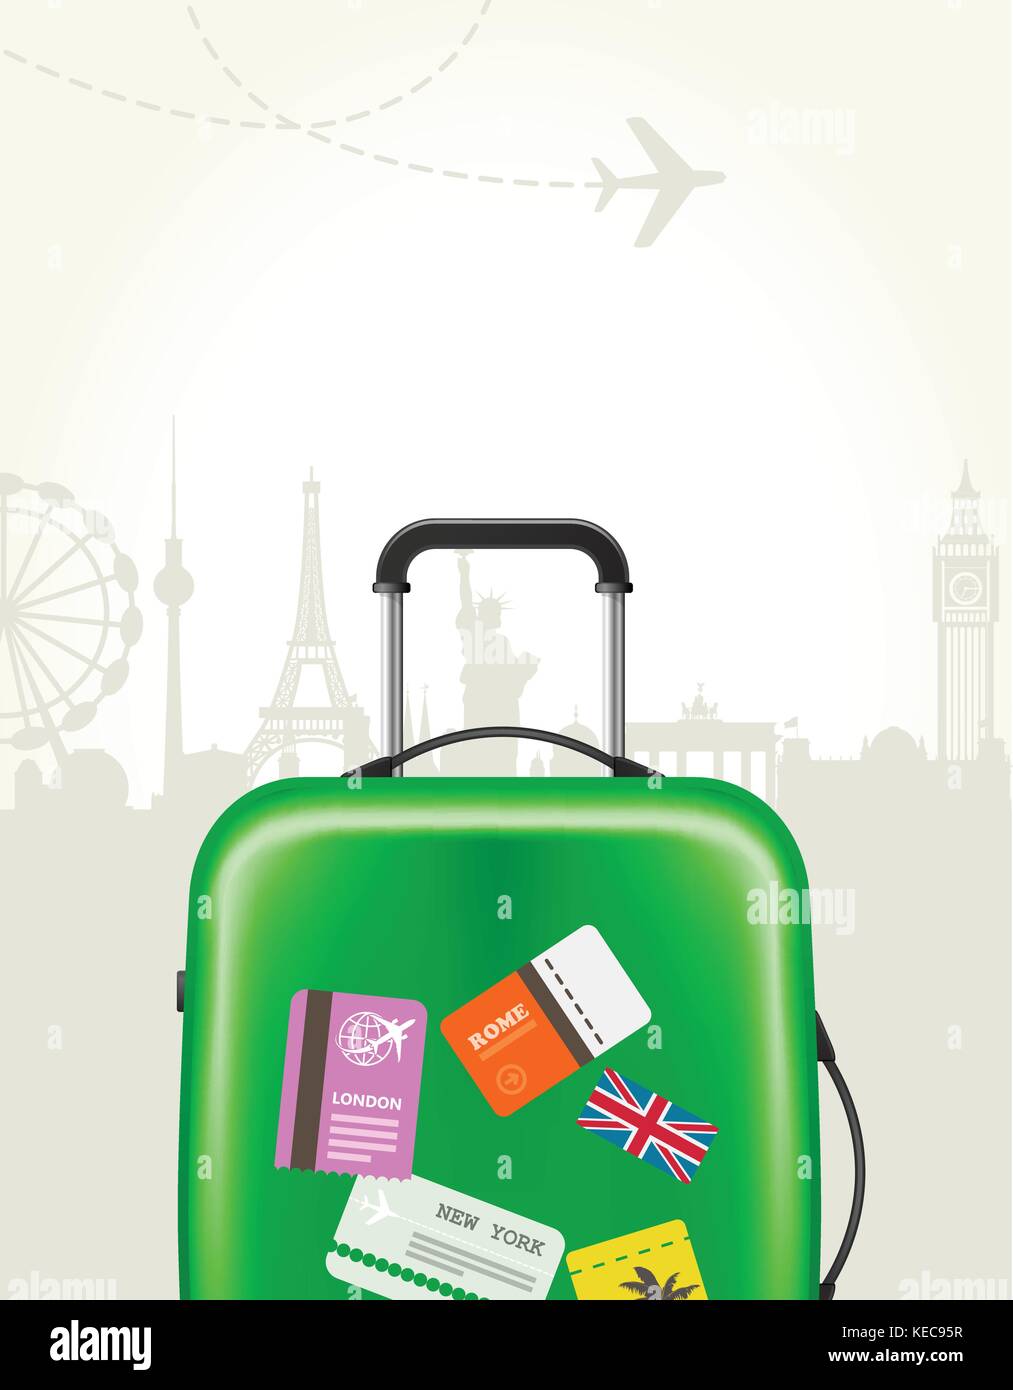 Modern suitcase with travel tags - journey baggage Stock Vector